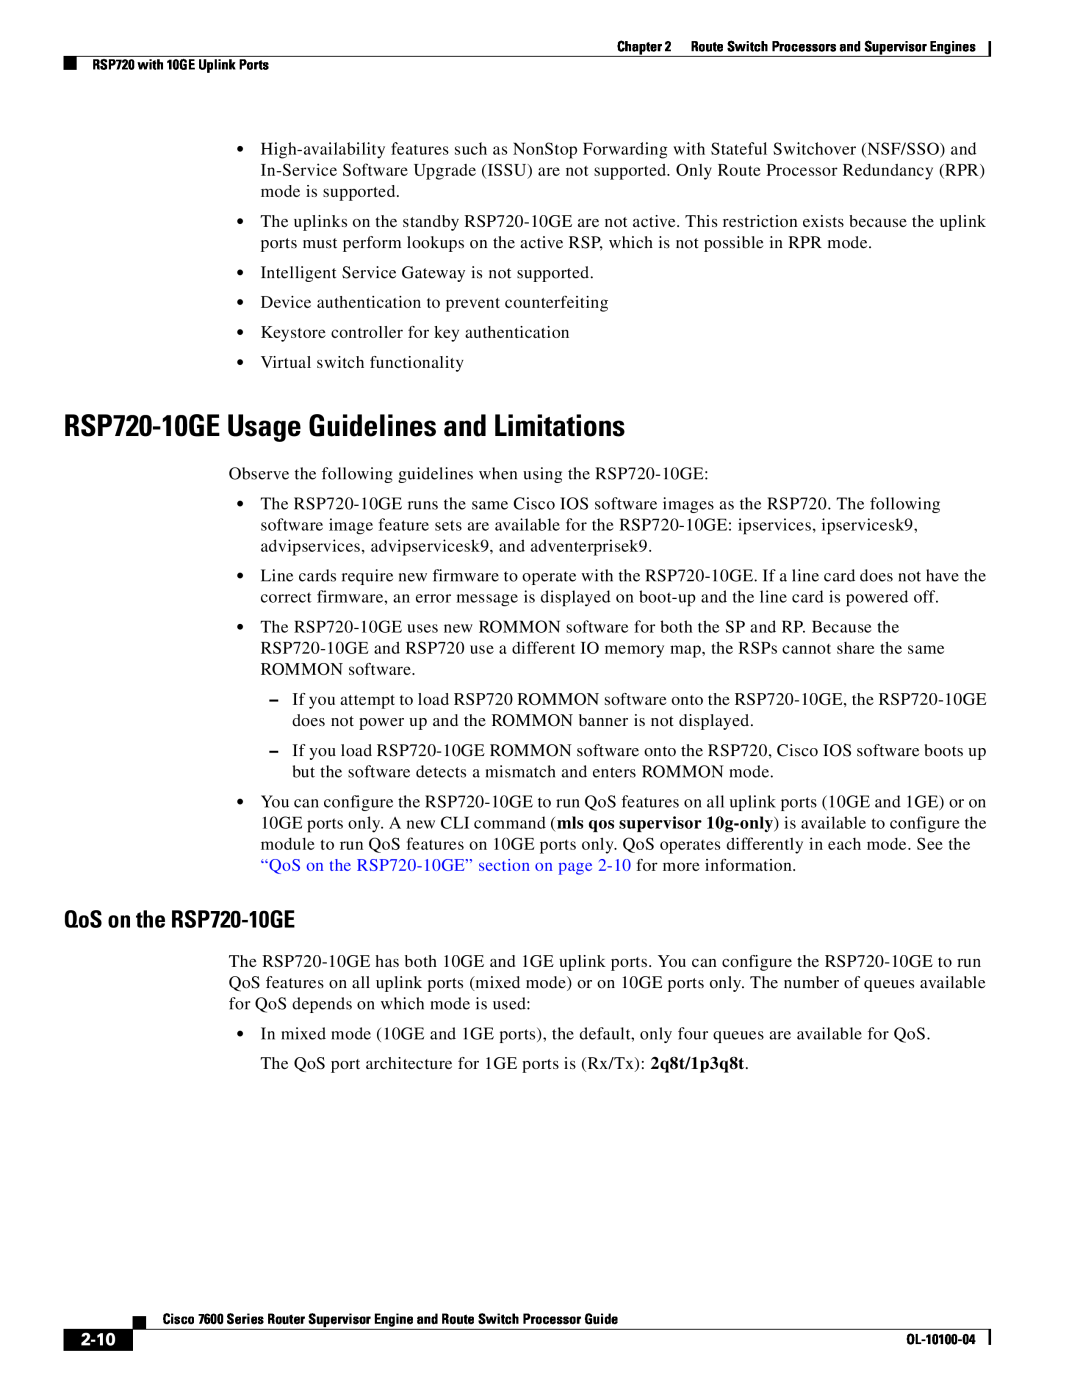 Cisco Systems 7600 manual RSP720-10GE Usage Guidelines and Limitations, QoS on the RSP720-10GE, 2-10 